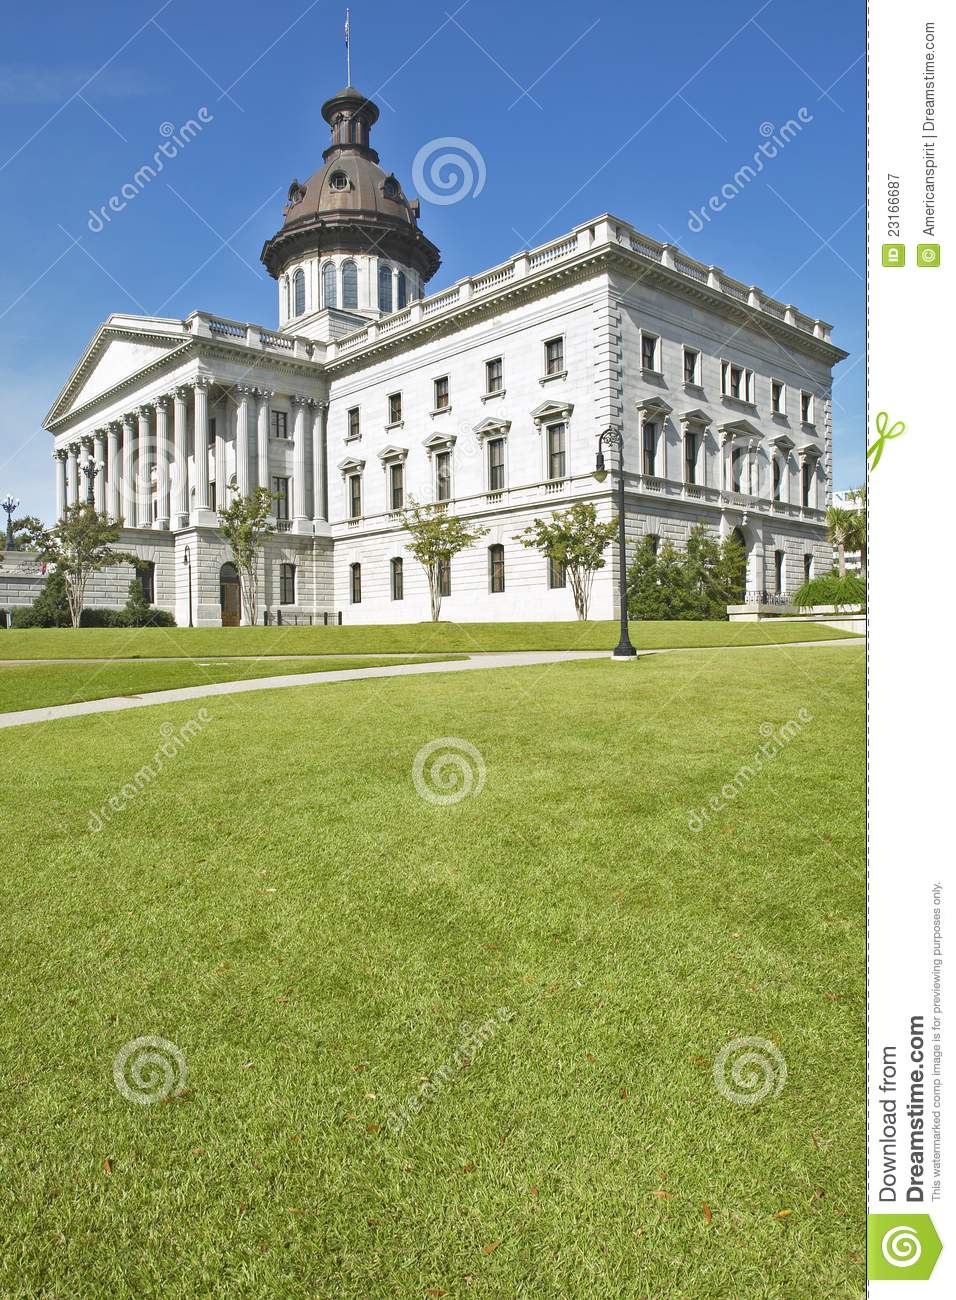 State Capitol Of South Carolina Royalty Free Stock Photography   Image    